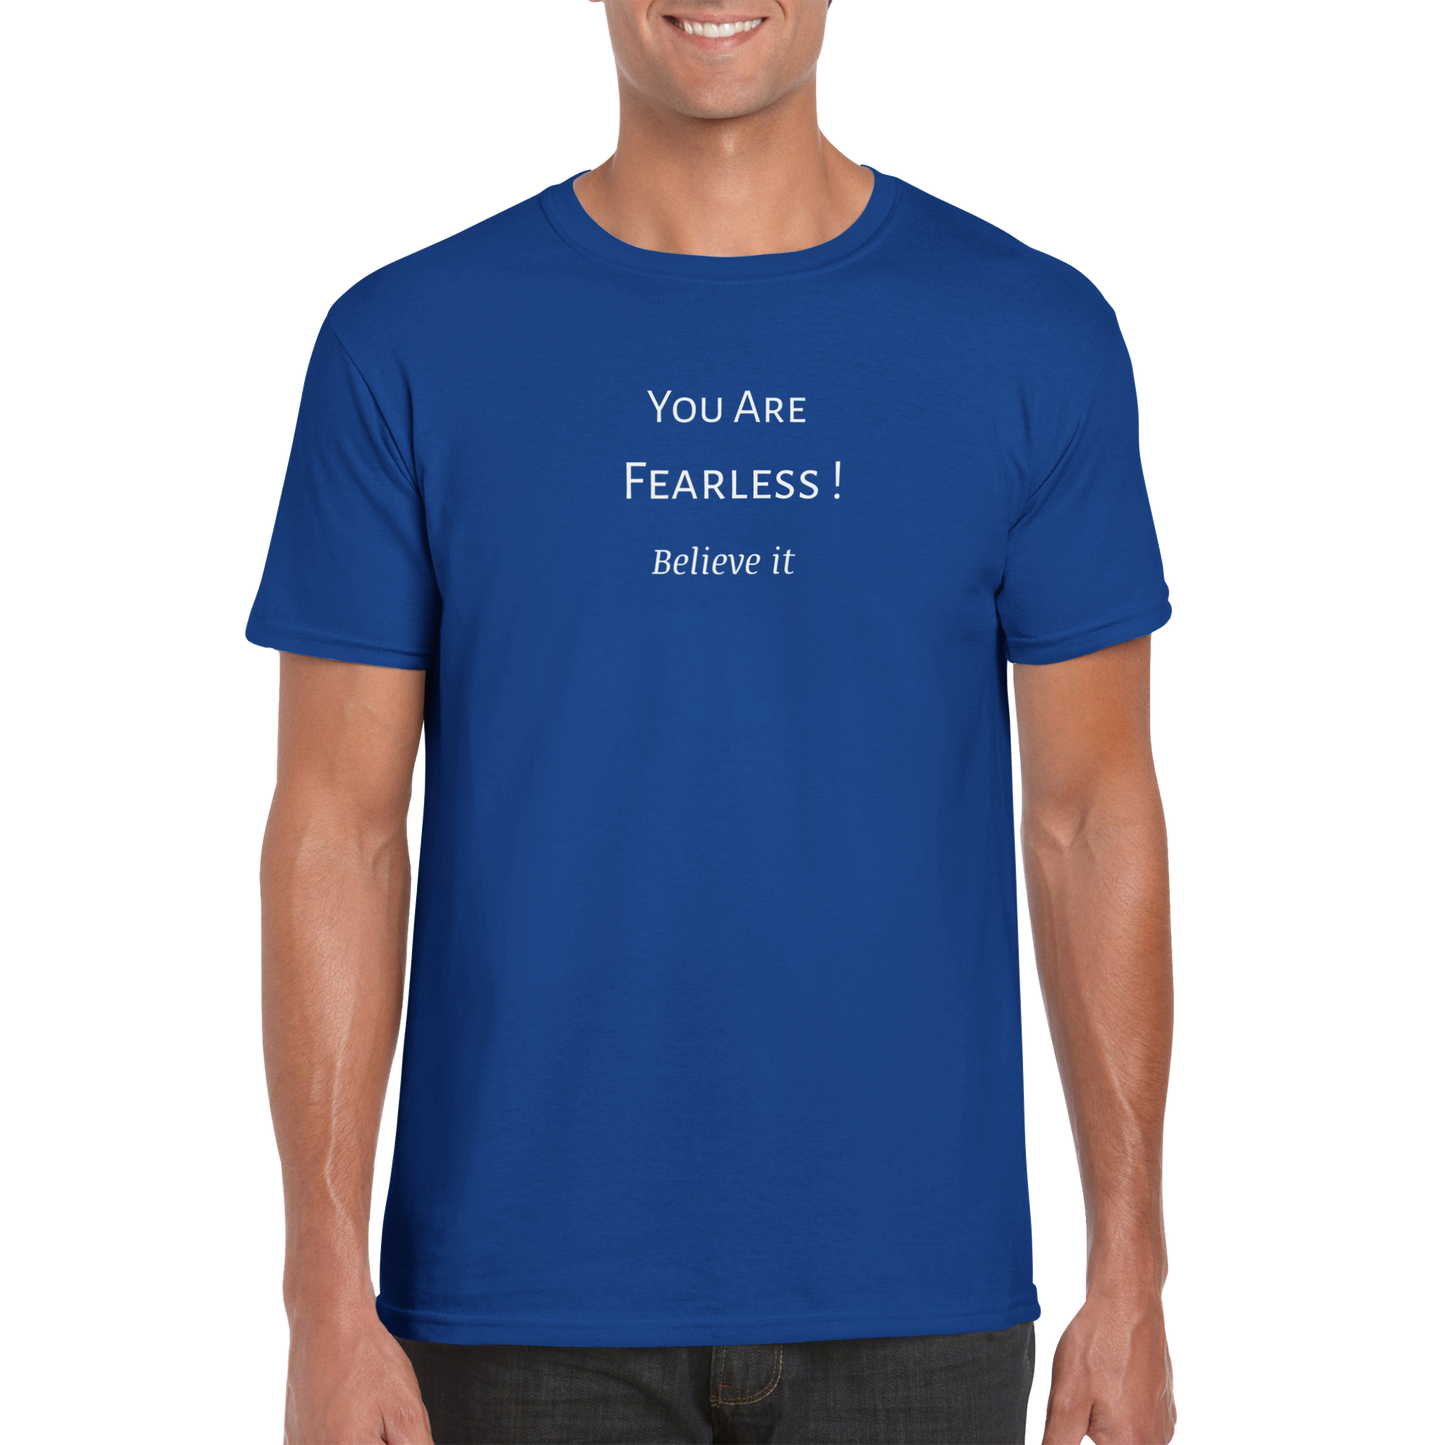 You Are Fearless! Classic Unisex Crewneck T-shirt